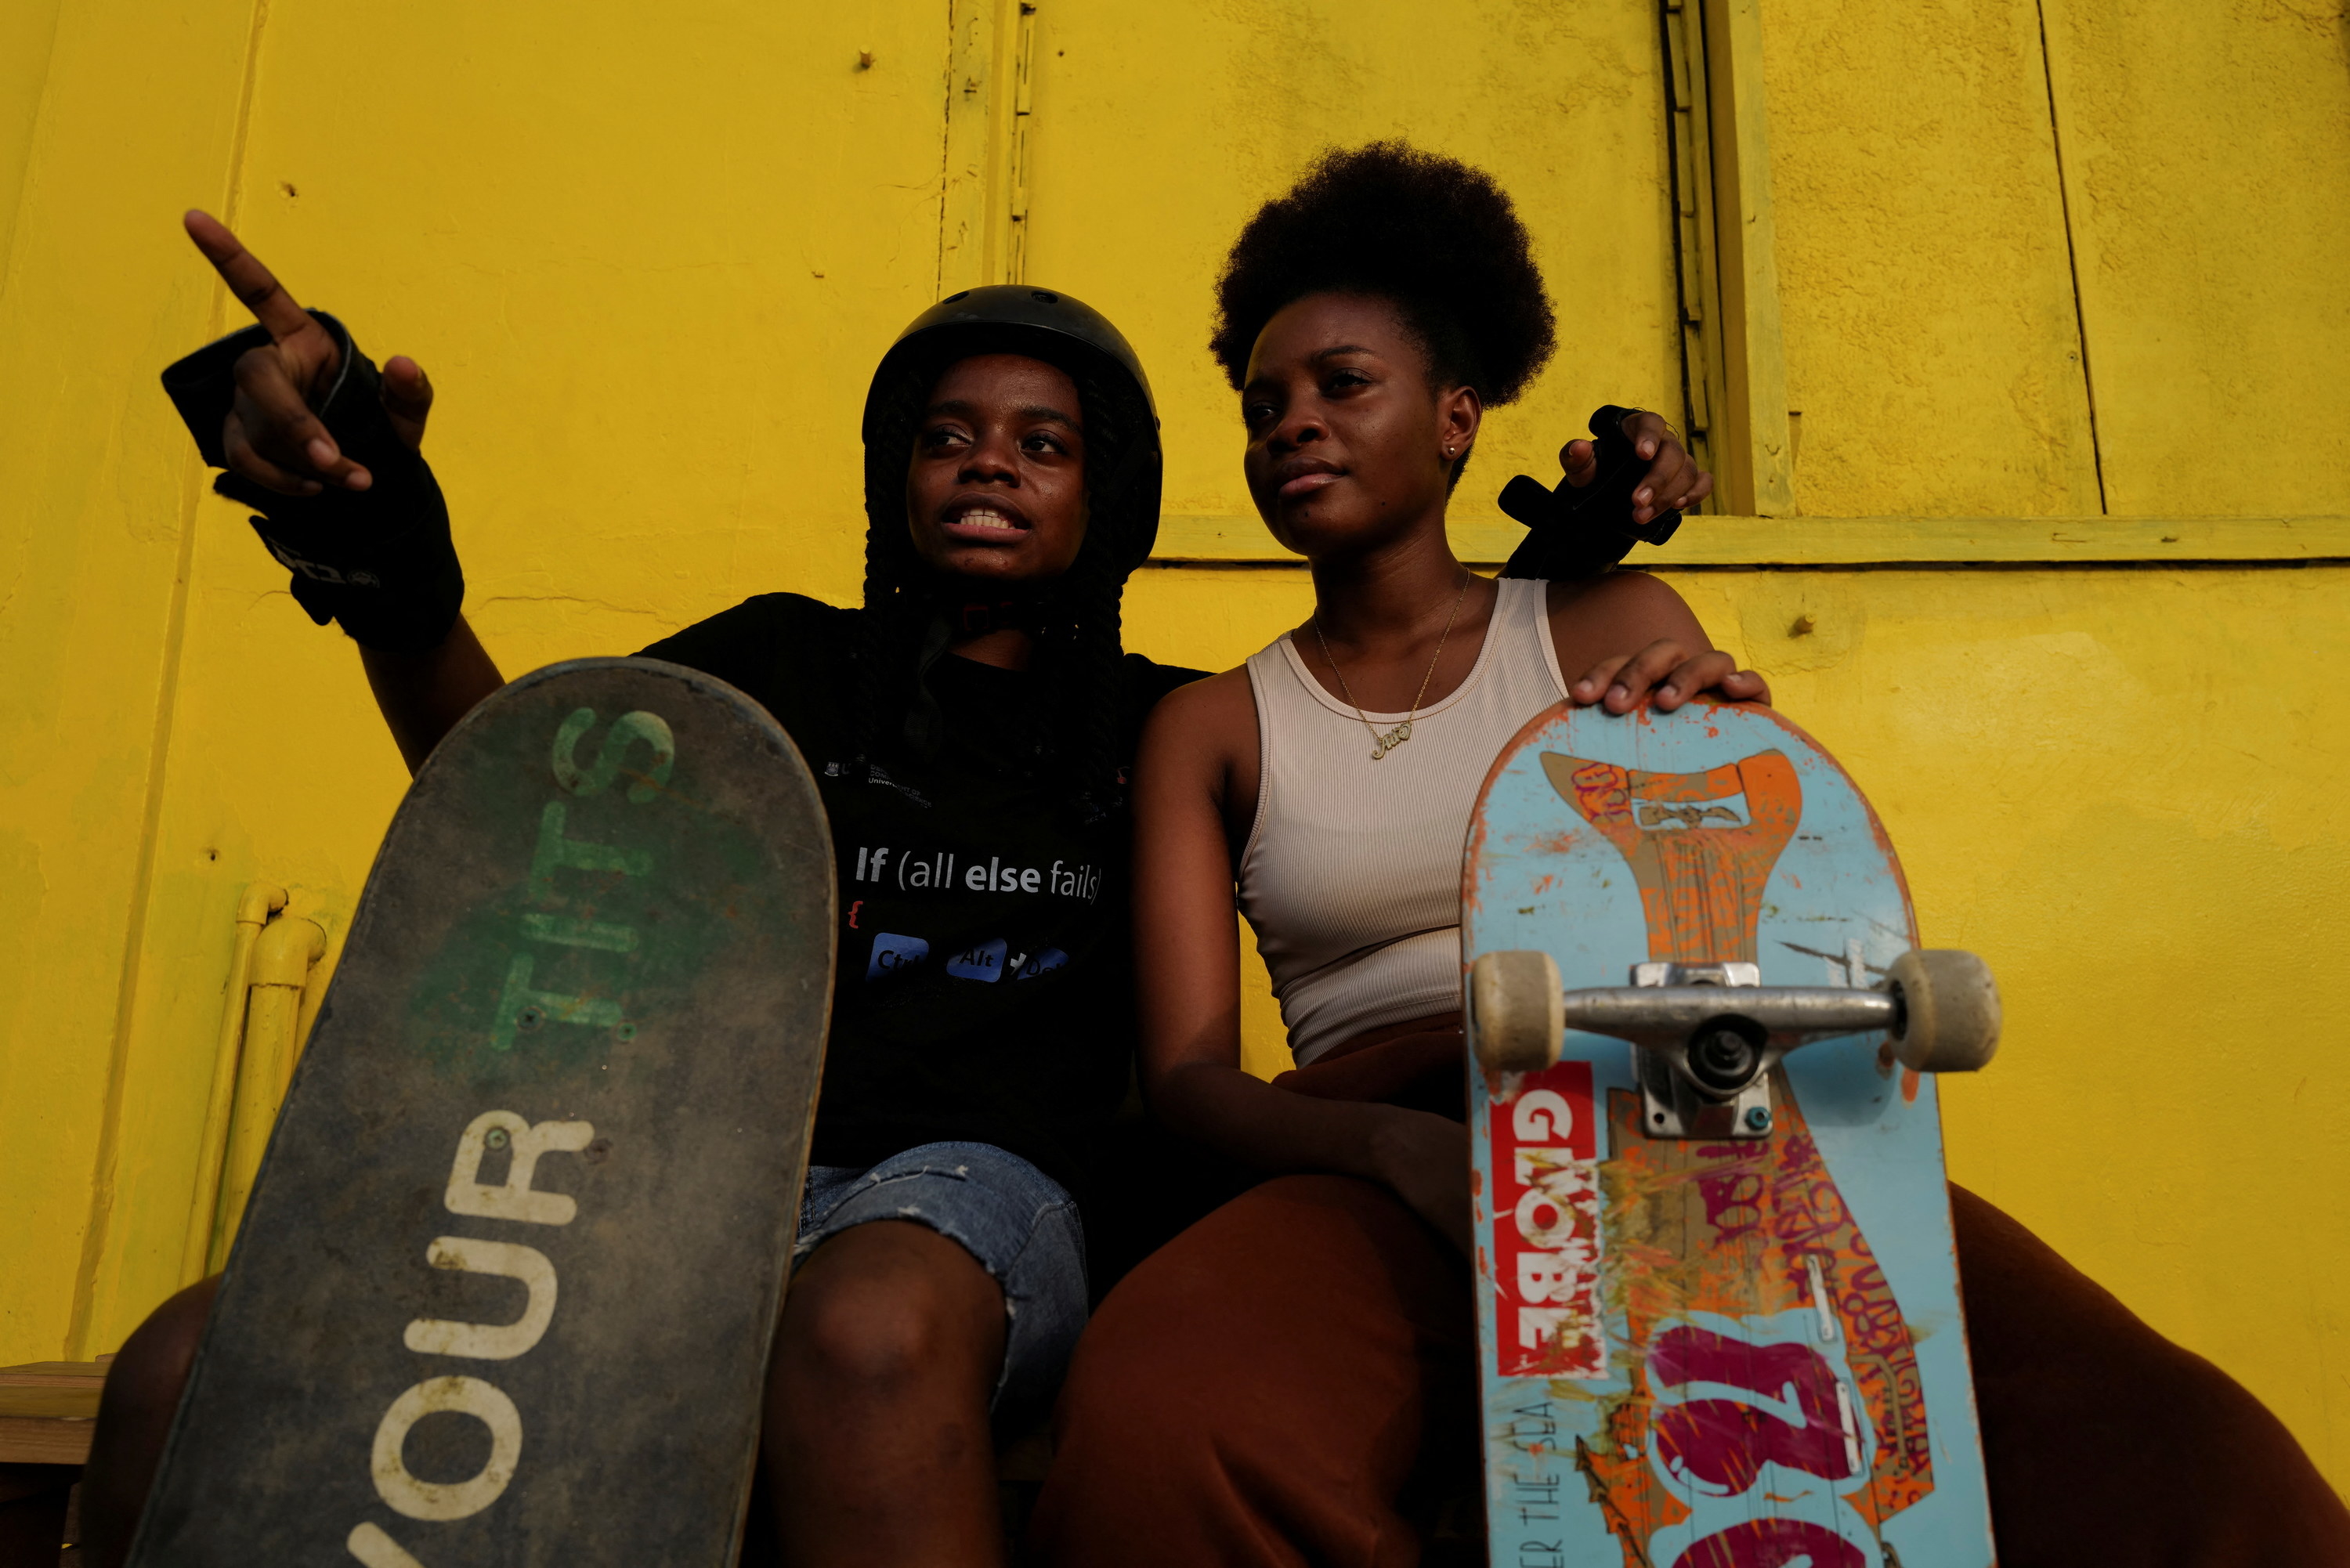 Twins Adelaide and Adeline Yeboah, 18, sit with their skateboards before practicing